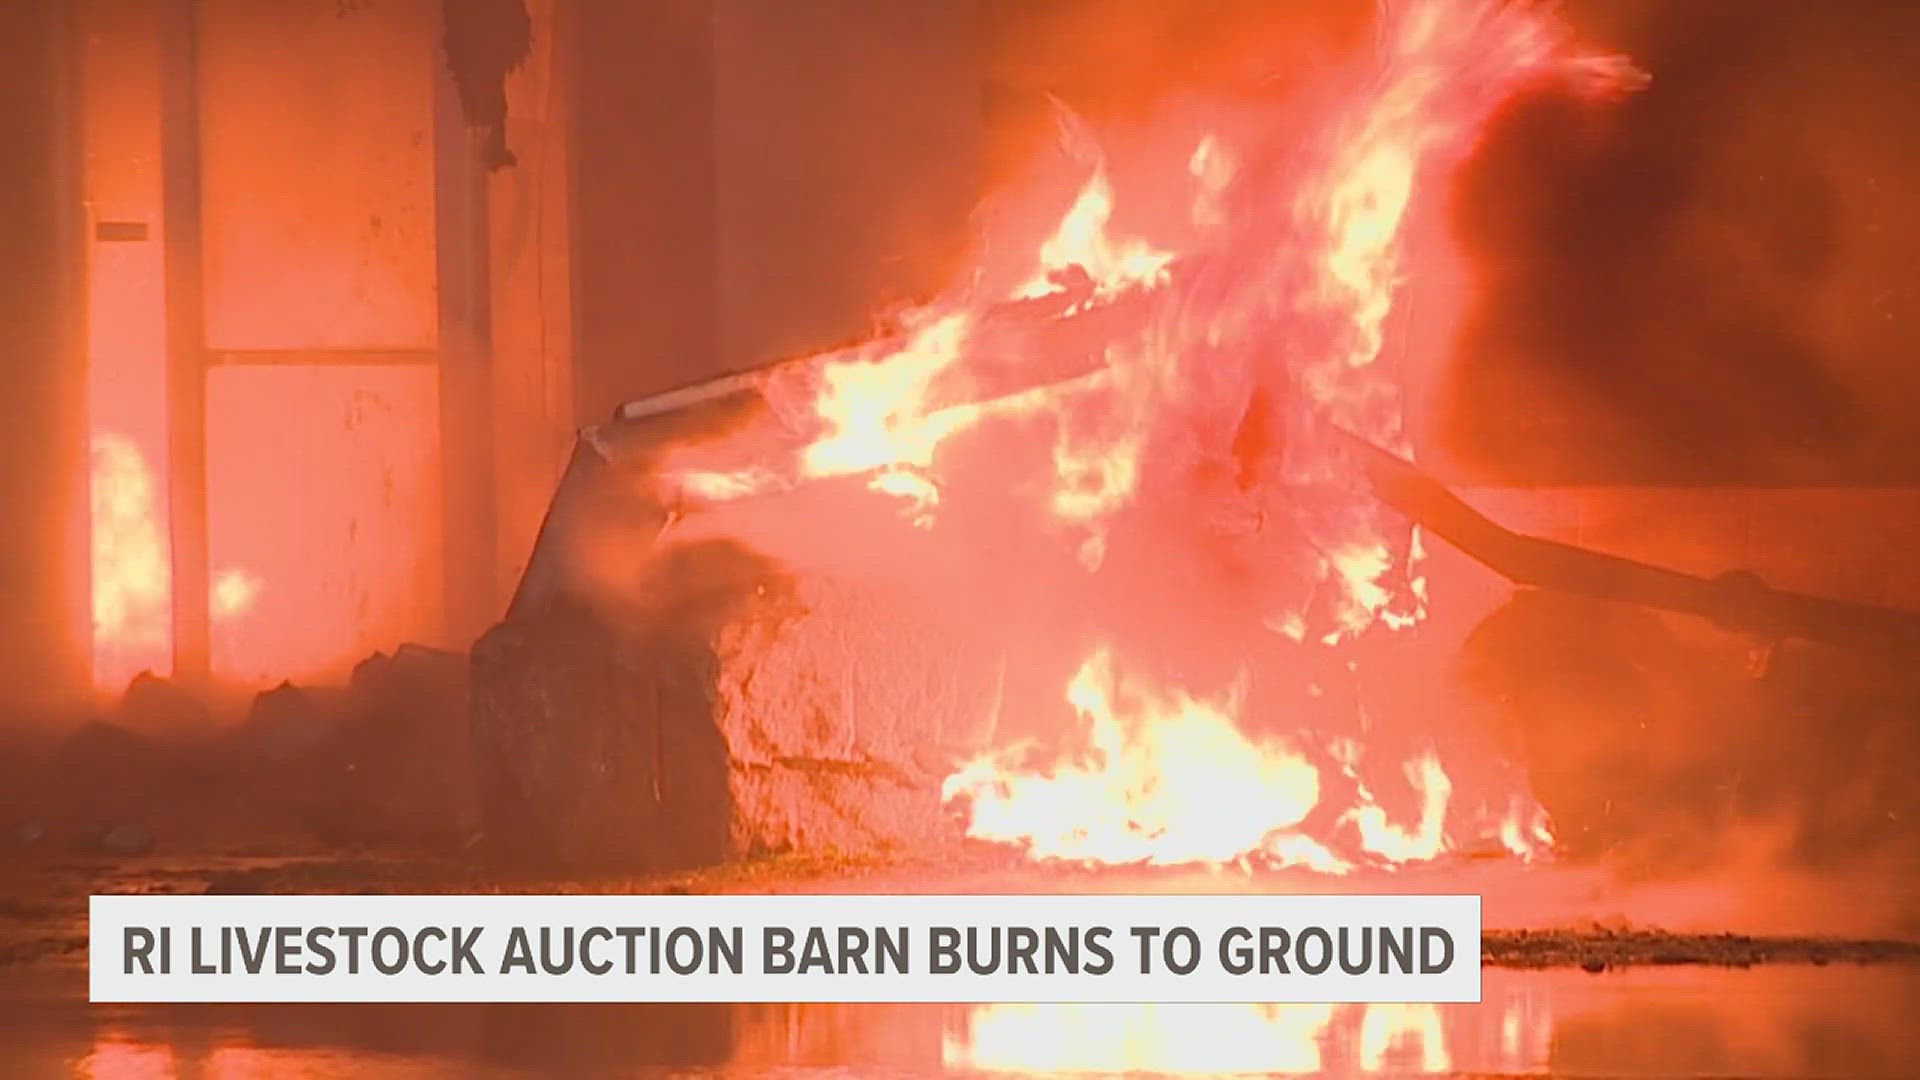 22 cattle were rescued from the blaze. One died, and one is still loose in Rock Island.